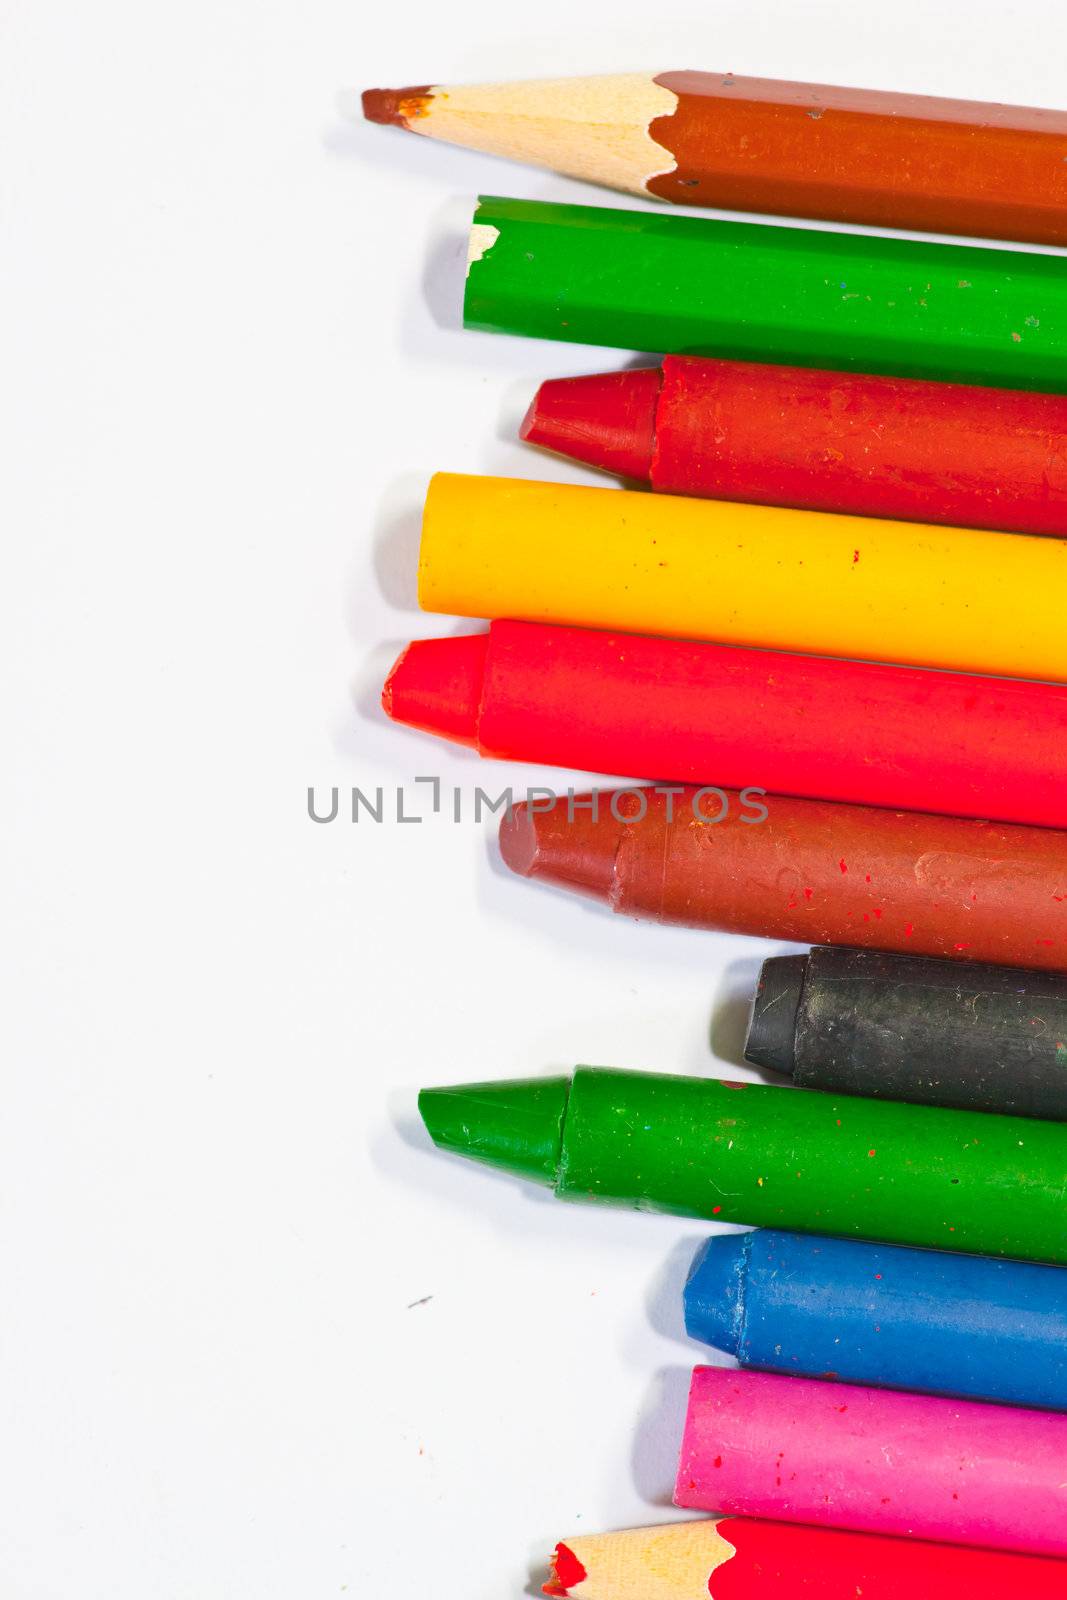 Crayon by nikky1972